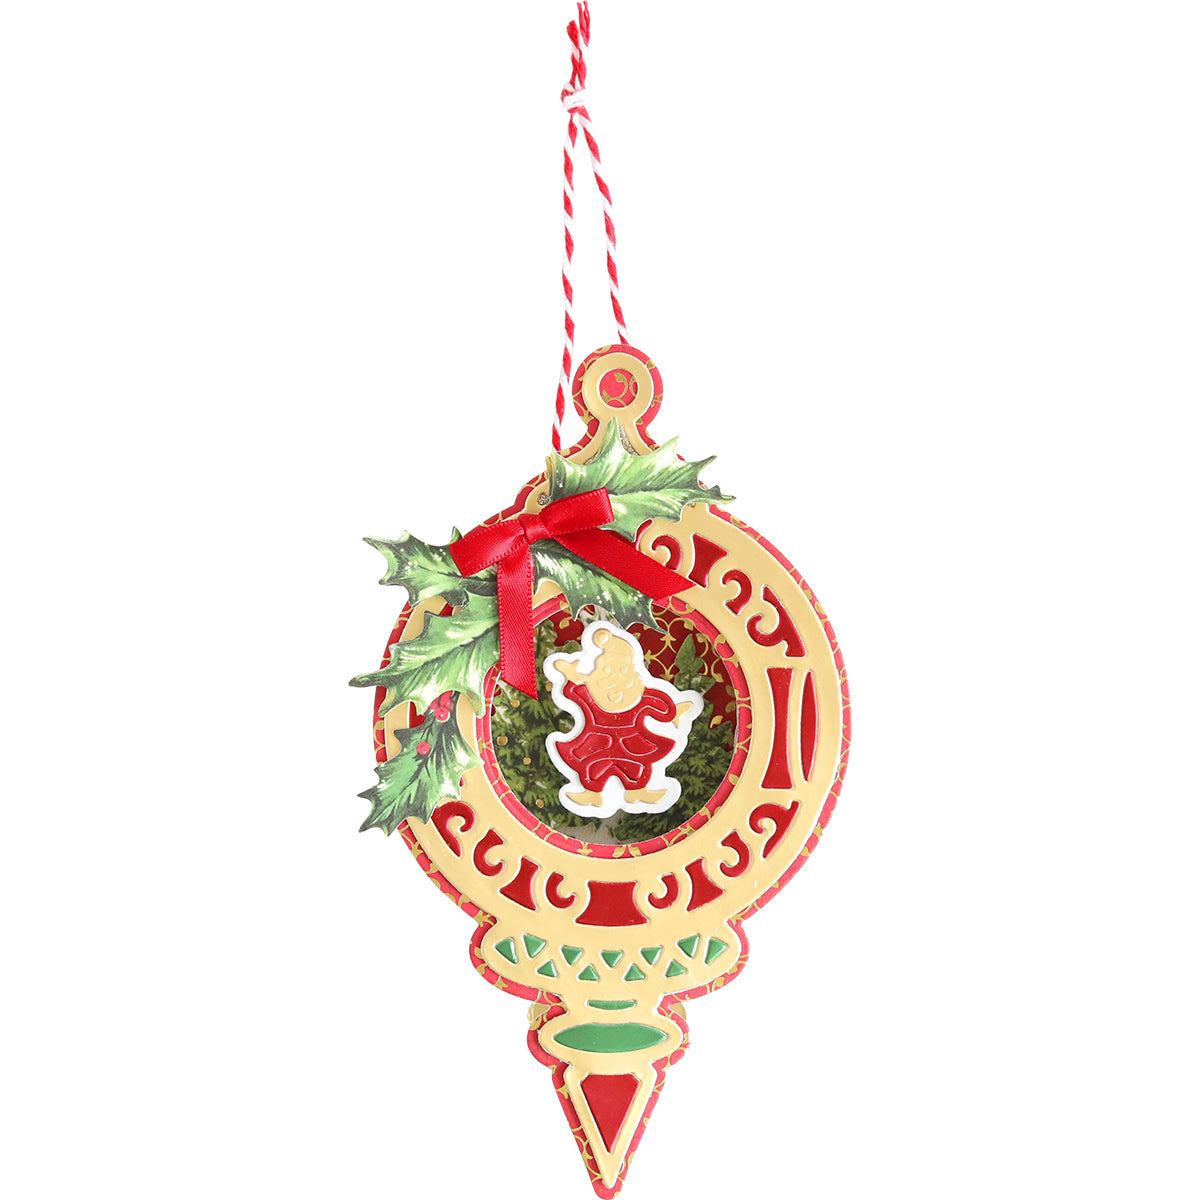 An Anna Griffin Christmas ornament adorned with holly and a Santa Claus, decorated with festive embellishments.